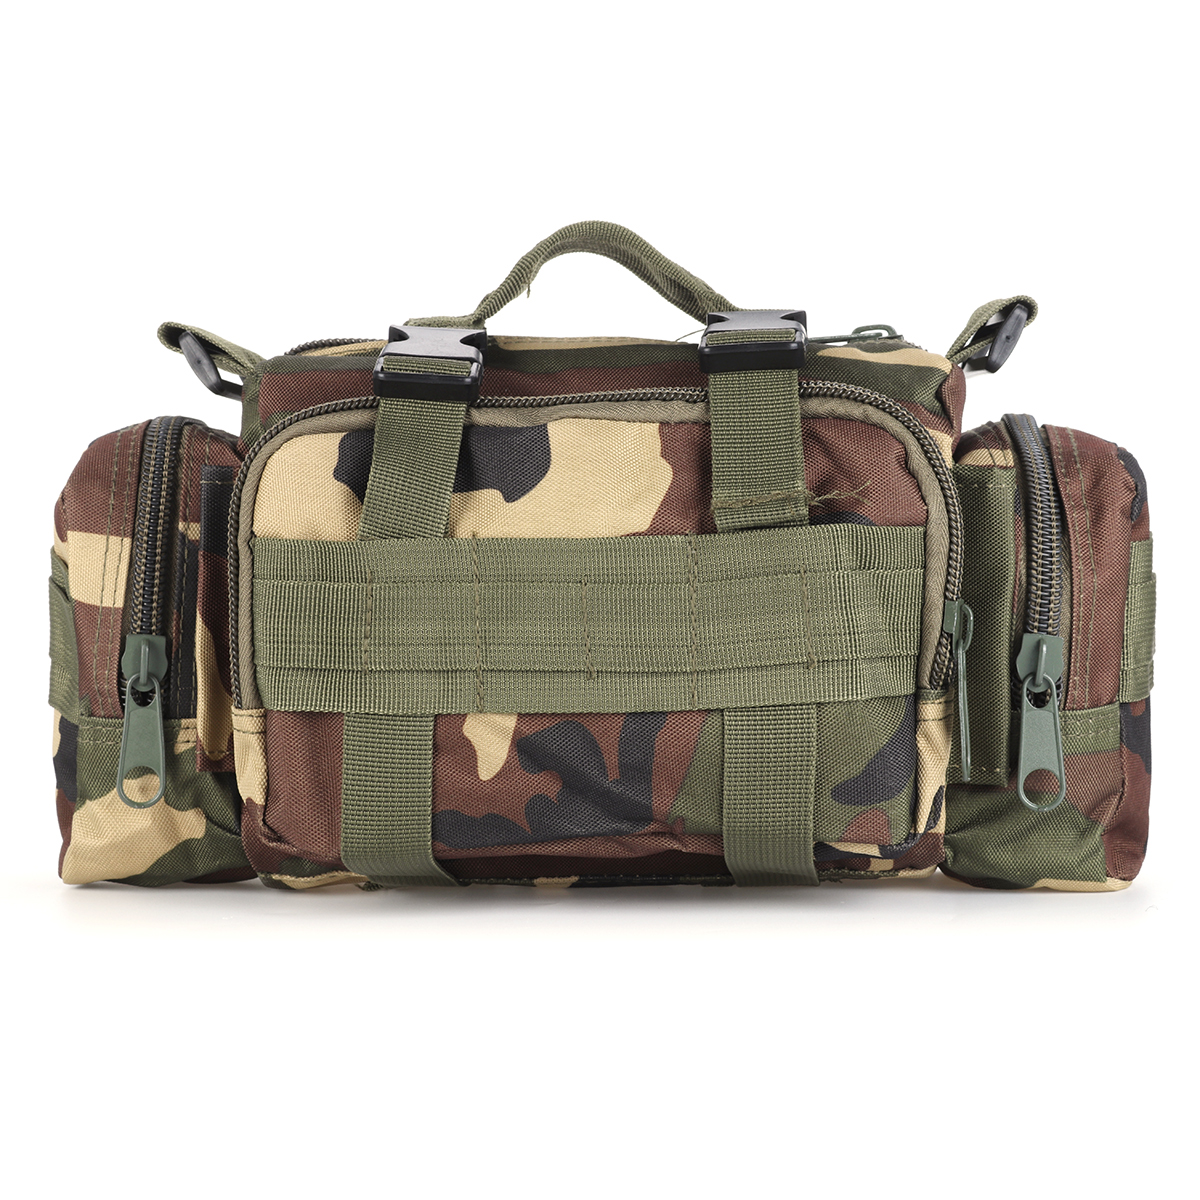 Multifunctional-Outdoor-Sports-Hiking-with-Zippers-Nylon-Oxford-Cloth-Tactical-Shoulder-Bag-Waist-Pa-1825563-12